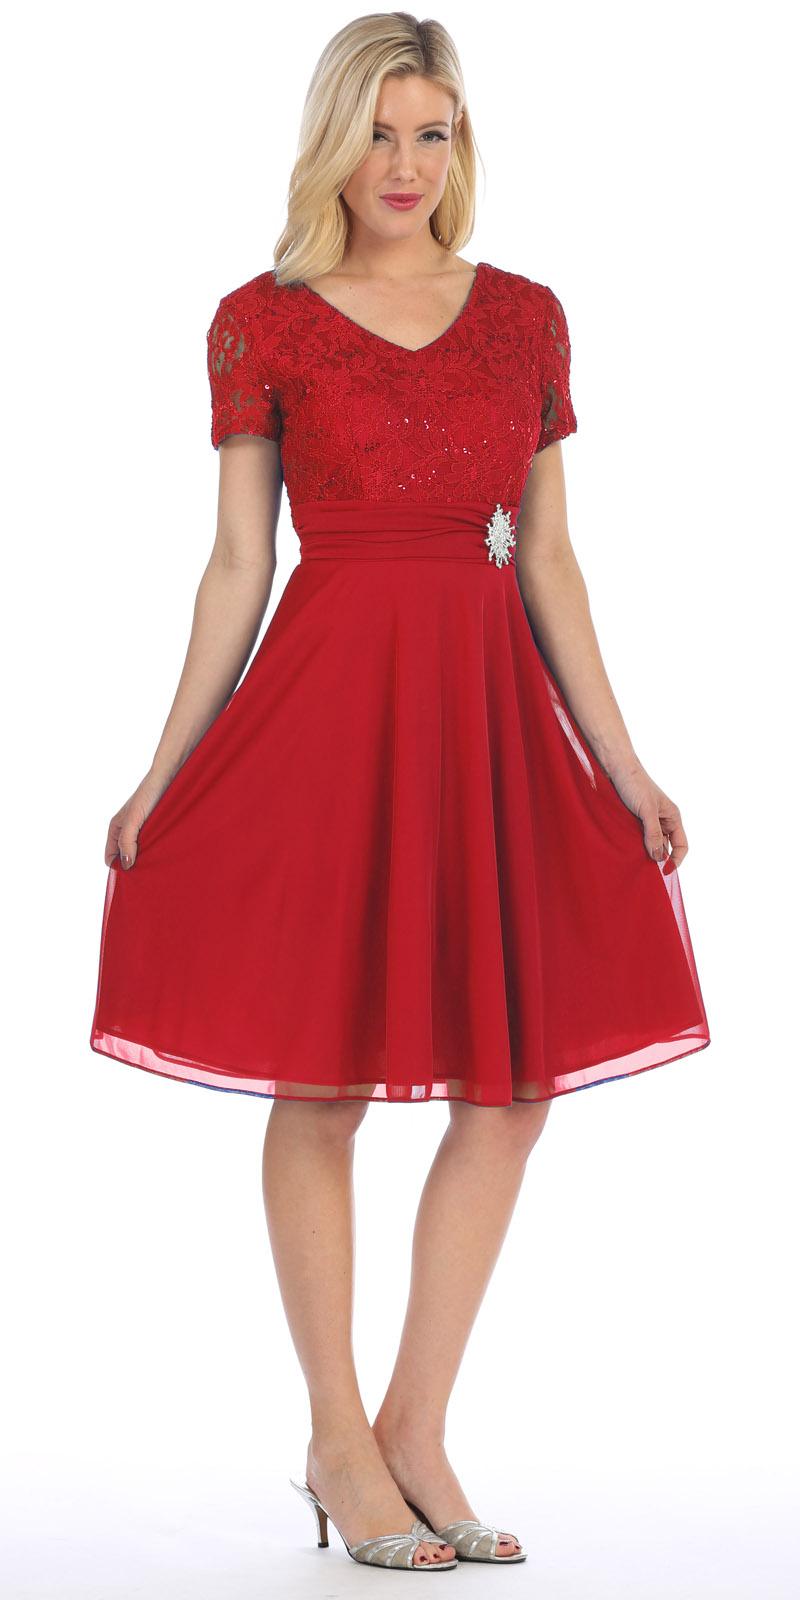 Celavie 6320-S - Knee Length Red Dress With Short Sleeves Lace Bodice Side View